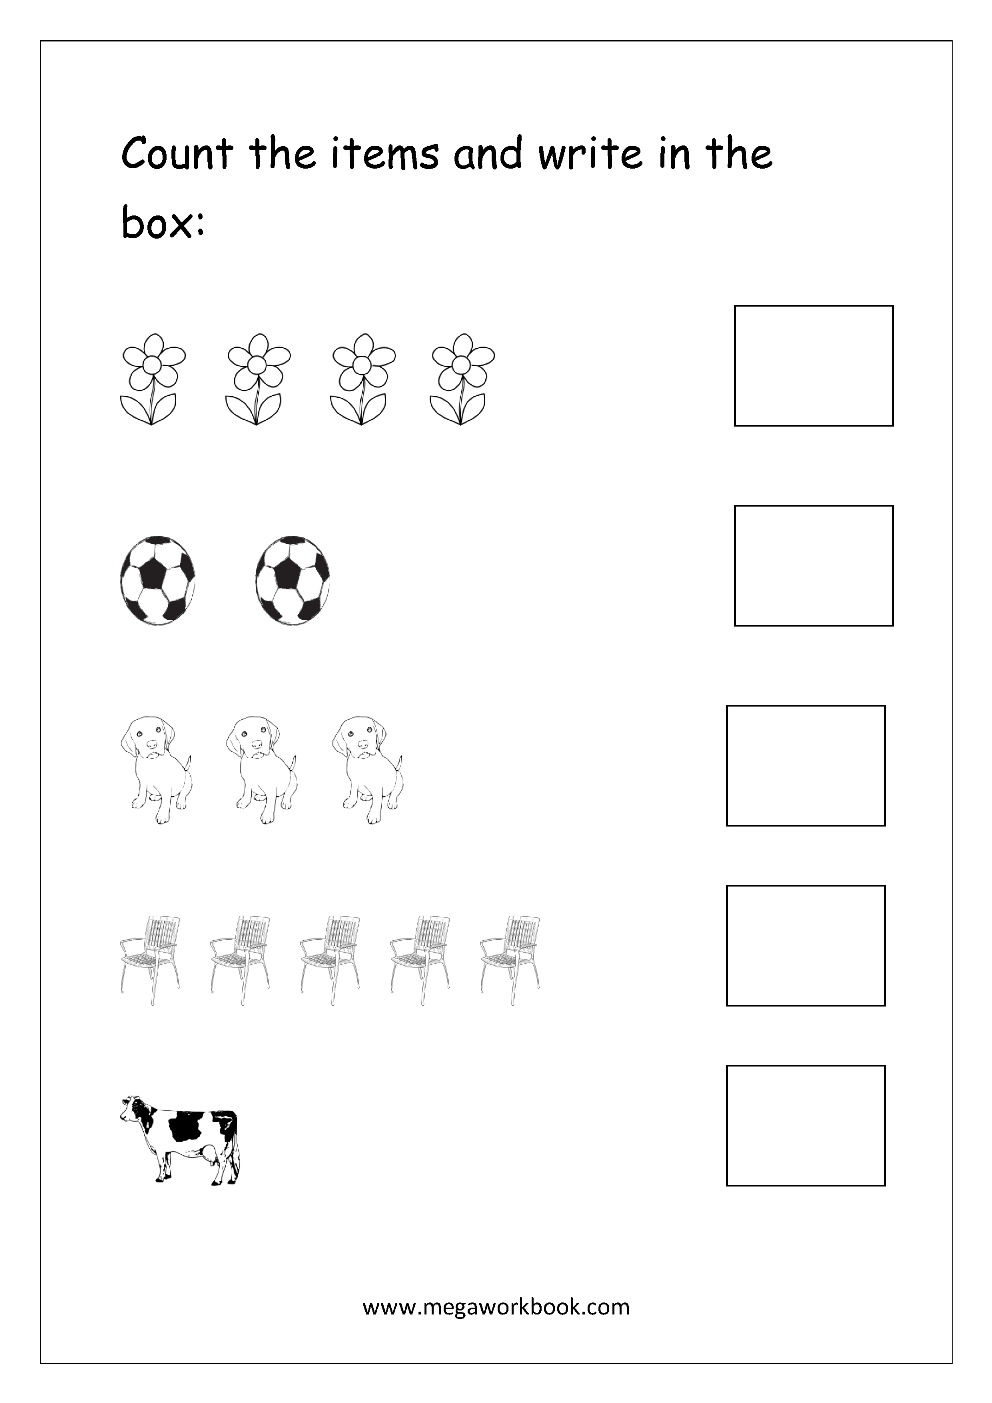 Free Printable Number Counting Worksheets Count And Match Count And Write Count And Color The Objects Math Worksheets For Preschool And Kindergarten Megaworkbook